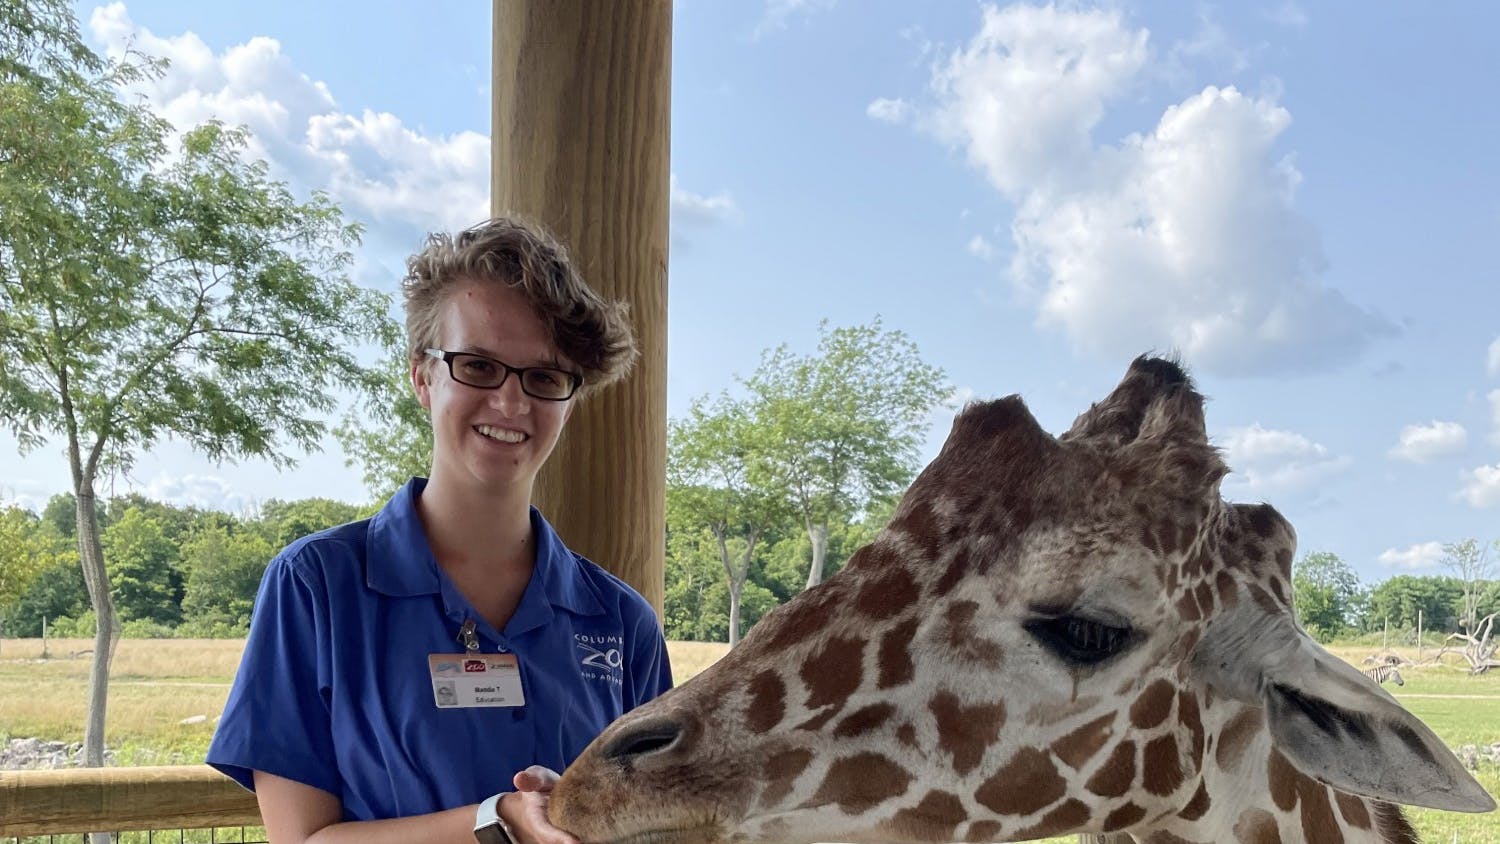 Maddie Torbert, a junior double majoring in Zoo & Conservation Science and Biology at Otterbein, feeds a giraffe while working at the Columbus Zoo this past summer. The Columbus zoo lost its AZA accreditation in December 2021, but plans to reapply in five